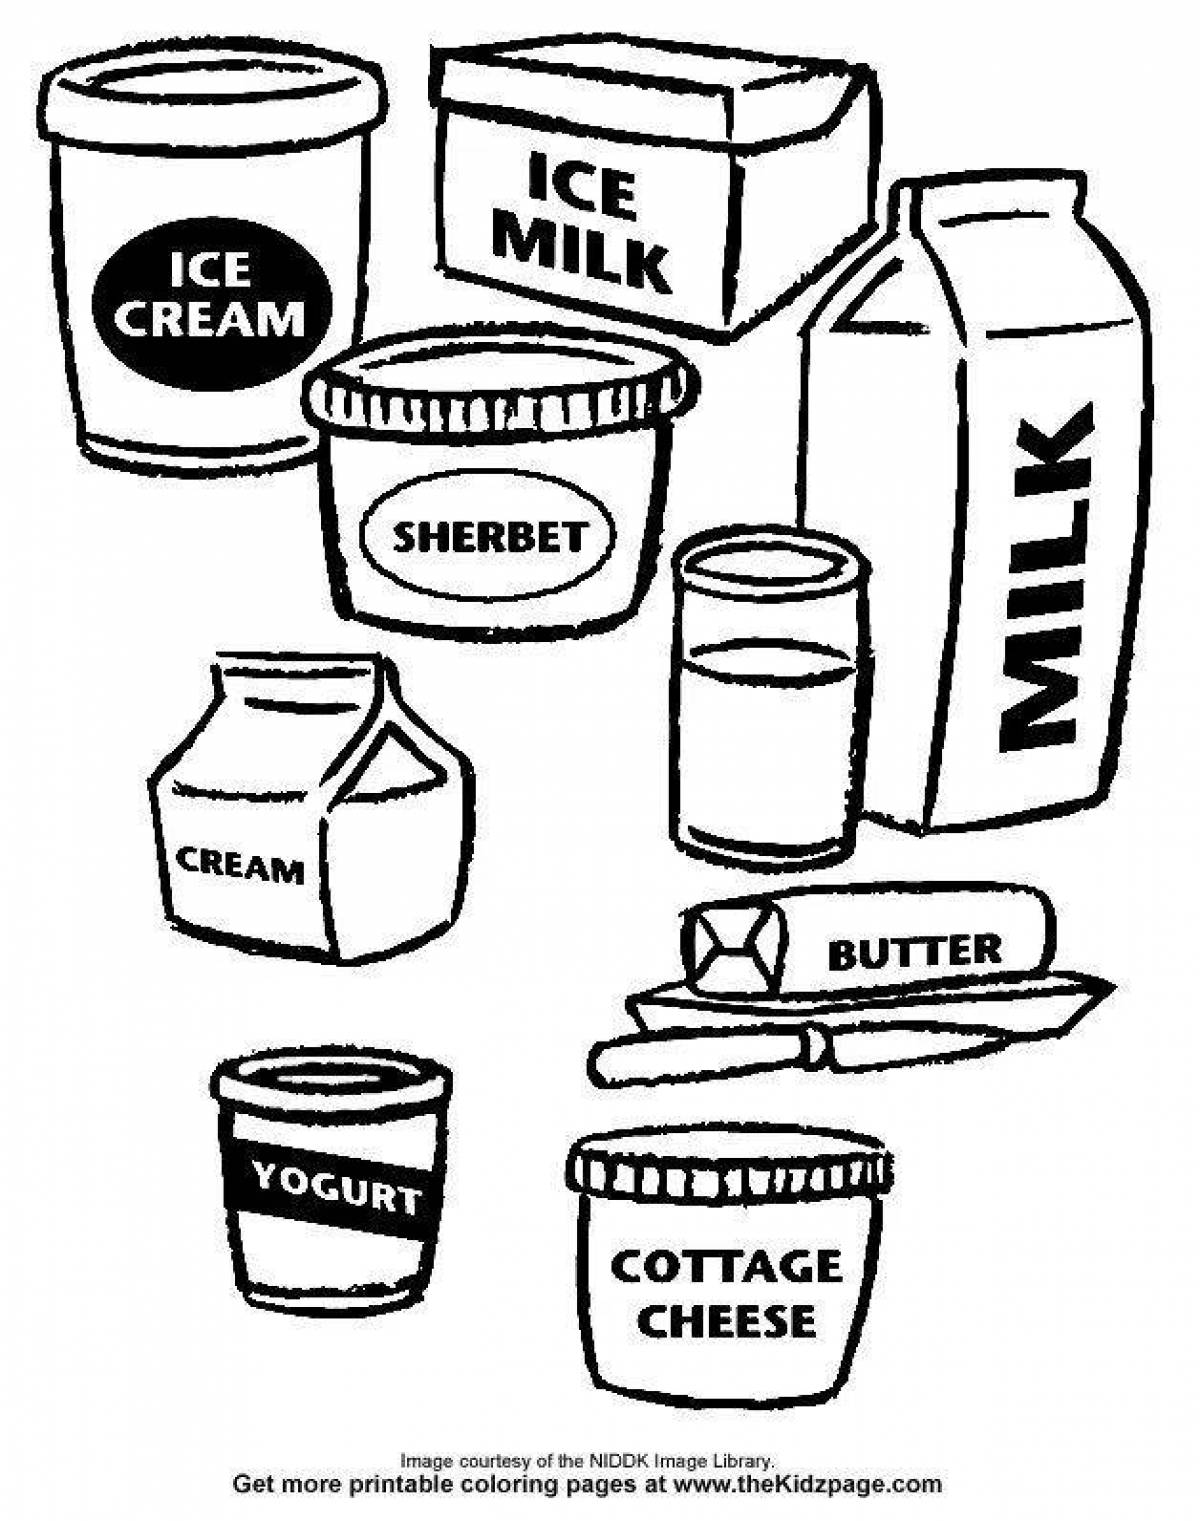 Dairy products #1